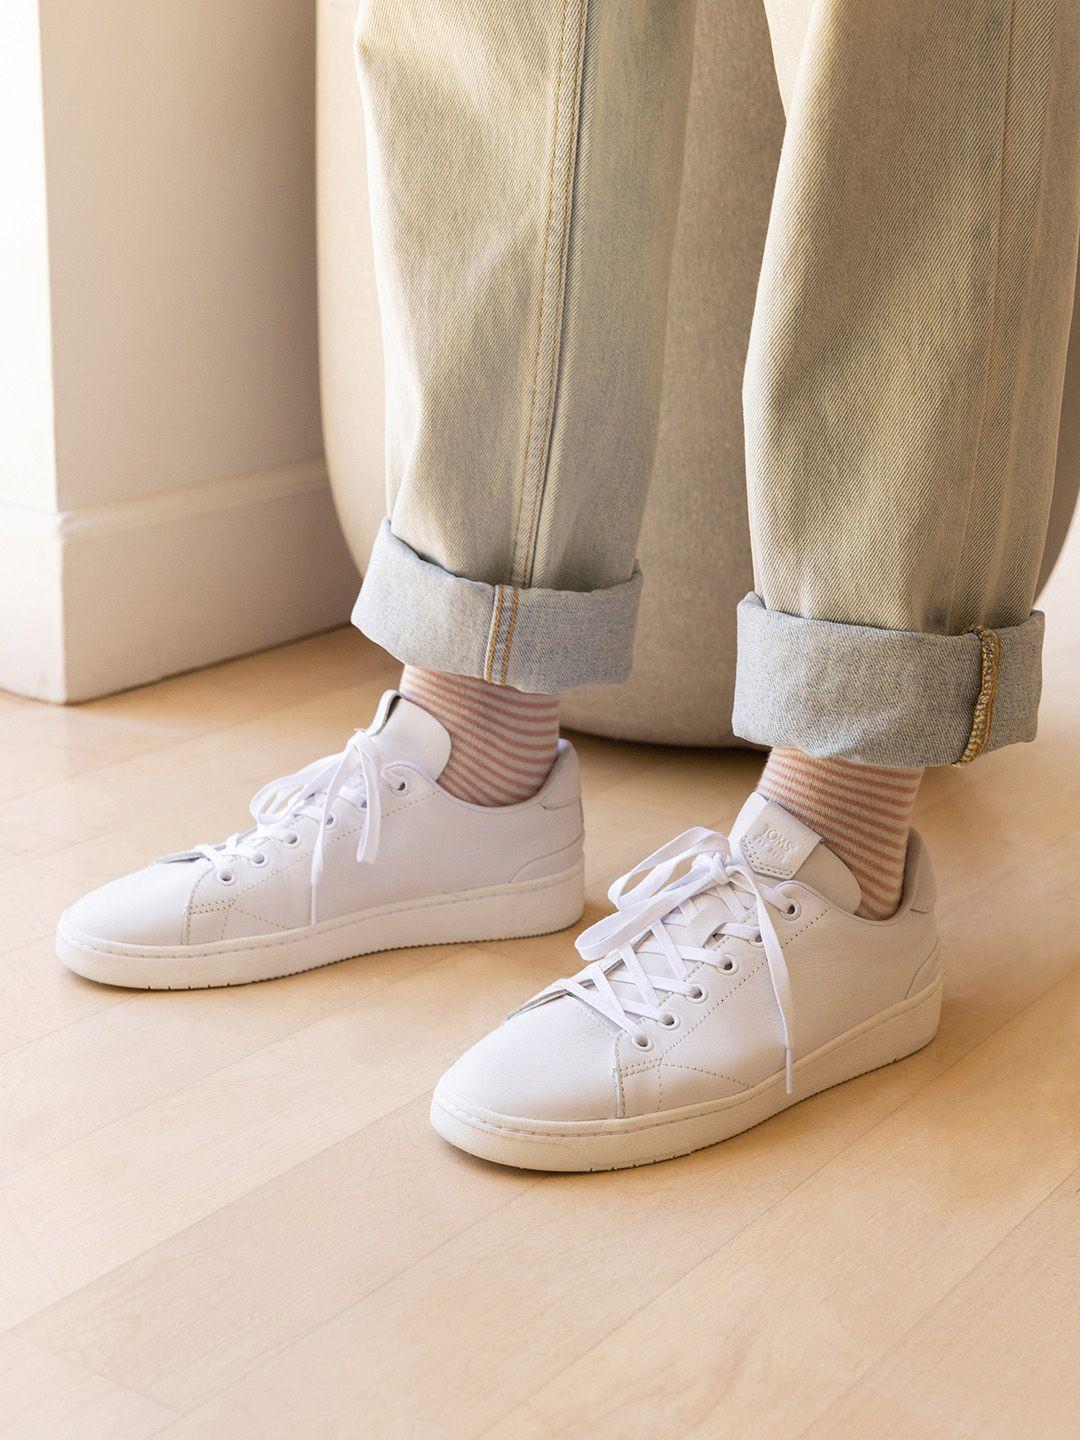 toms-men-white-solid-sneakers